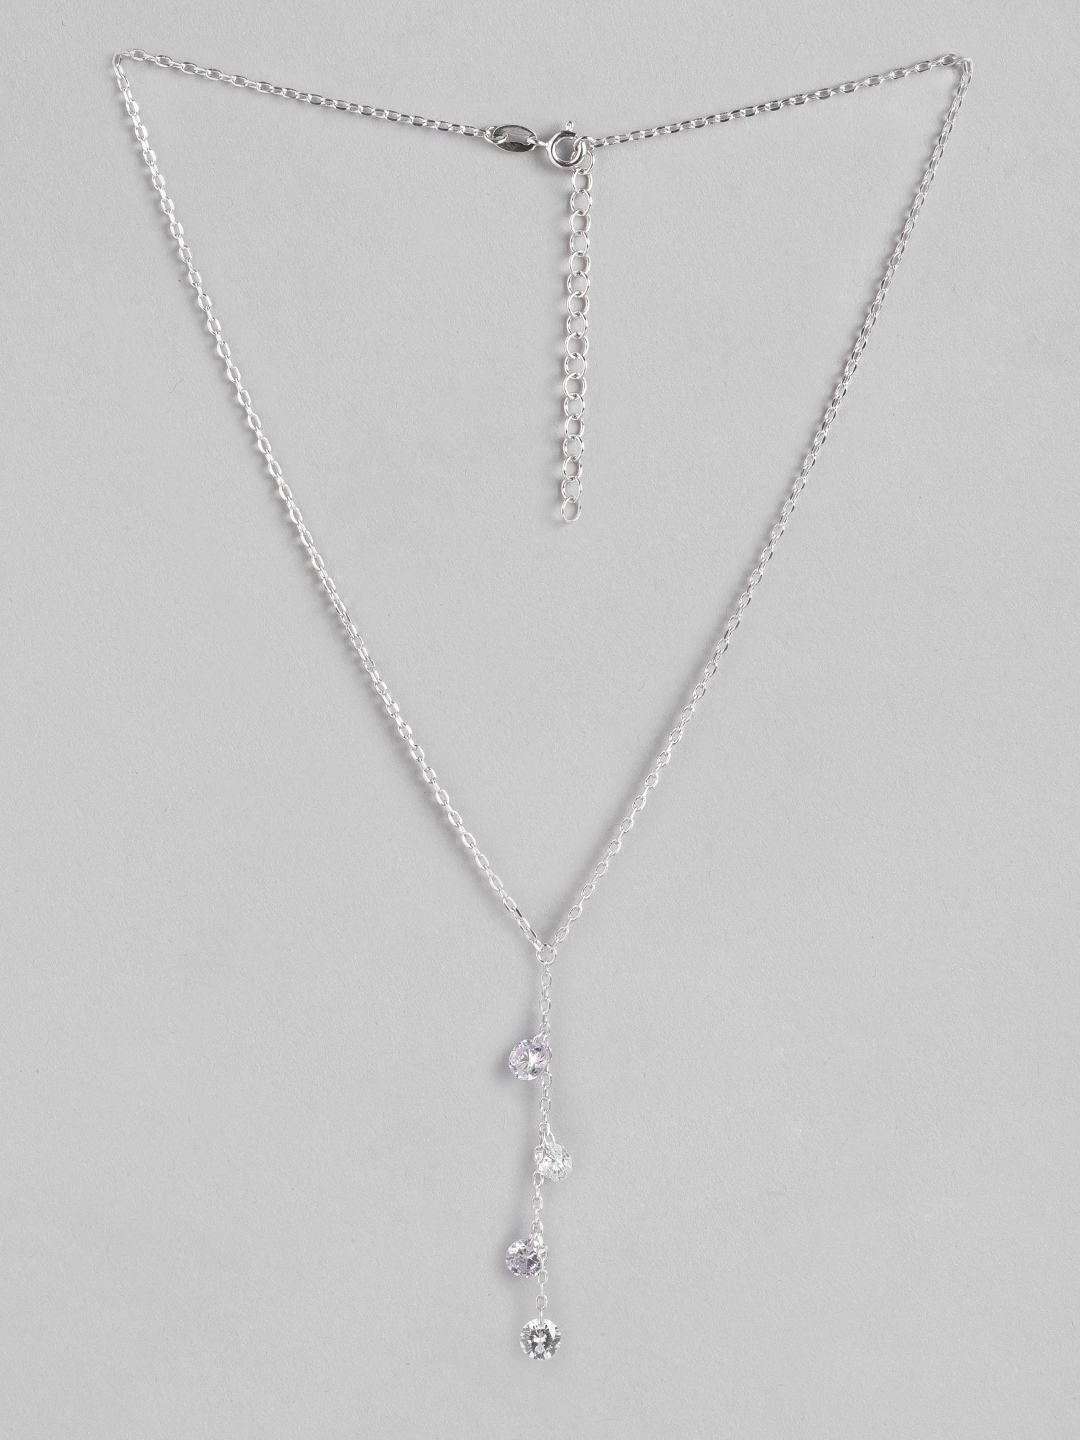 Carlton London Silver-Toned & Lavender Rhodium-Plated CZ Studded Handcrafted Chain Price in India